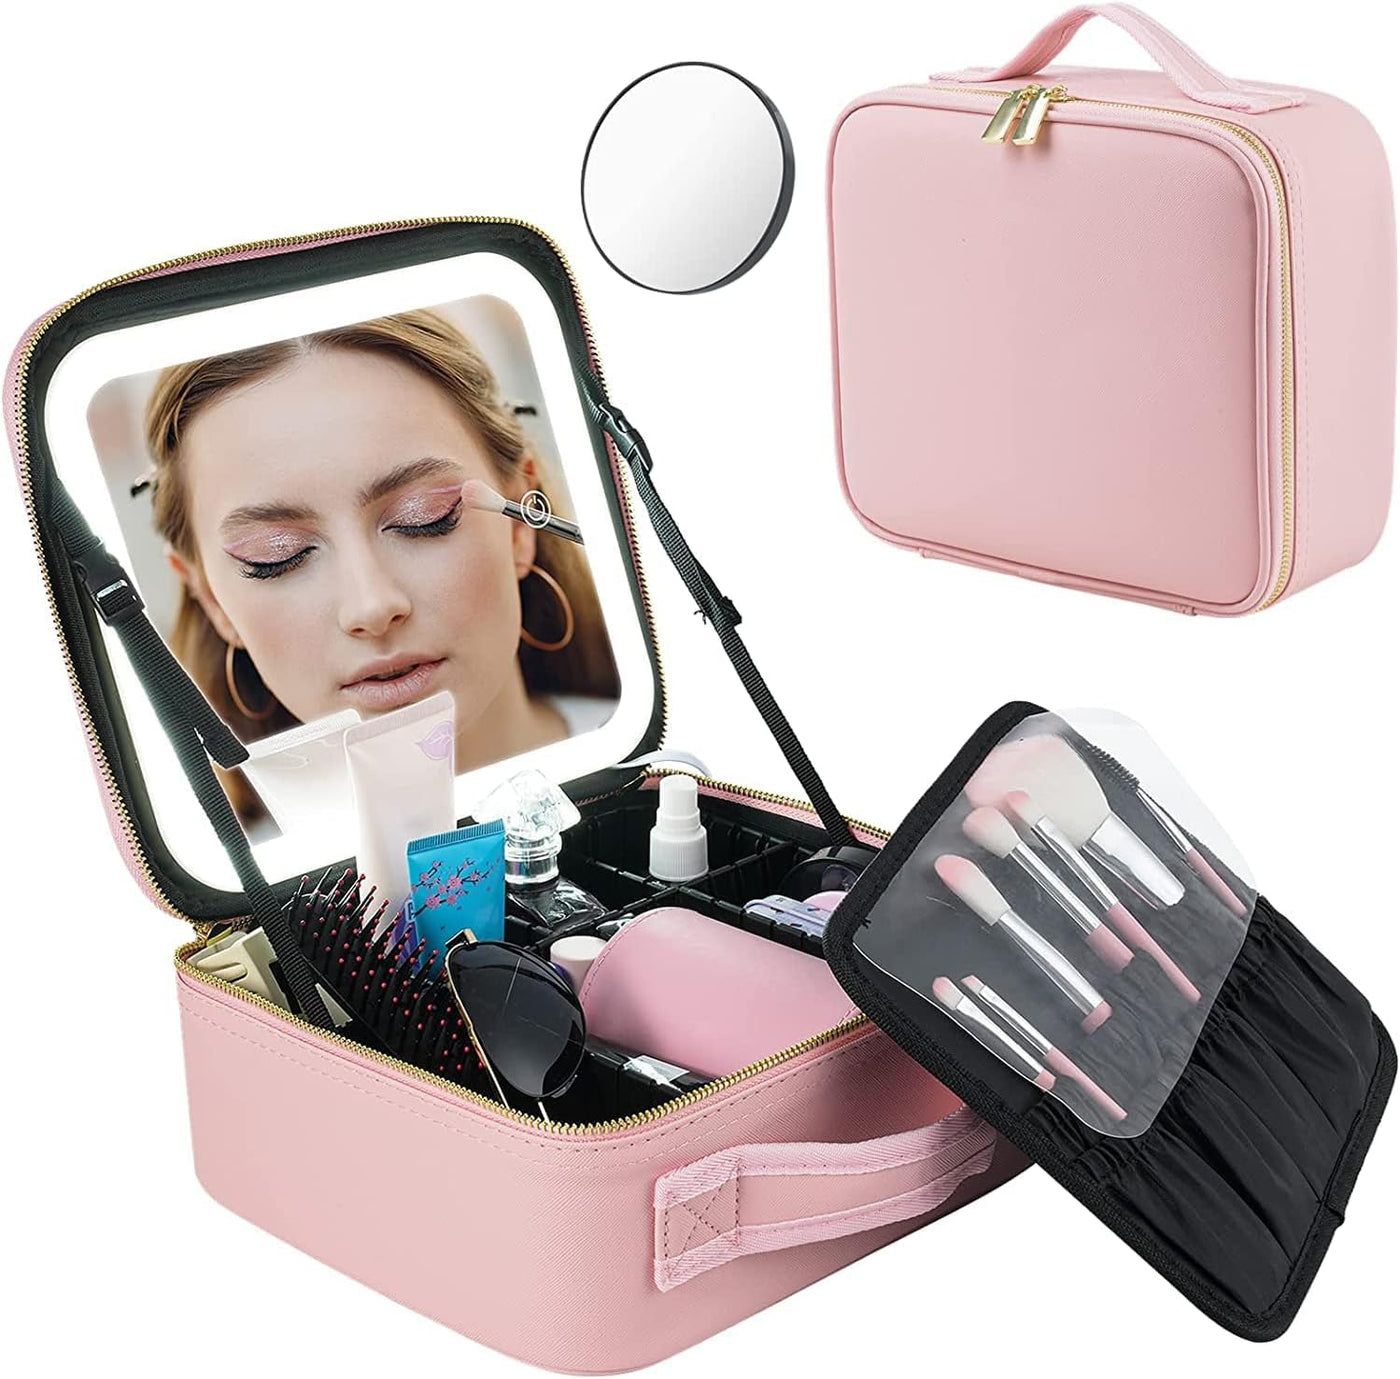 Makeup Bag with Lighted Mirror, Case Setting & Adjustable Dividers (Pink)